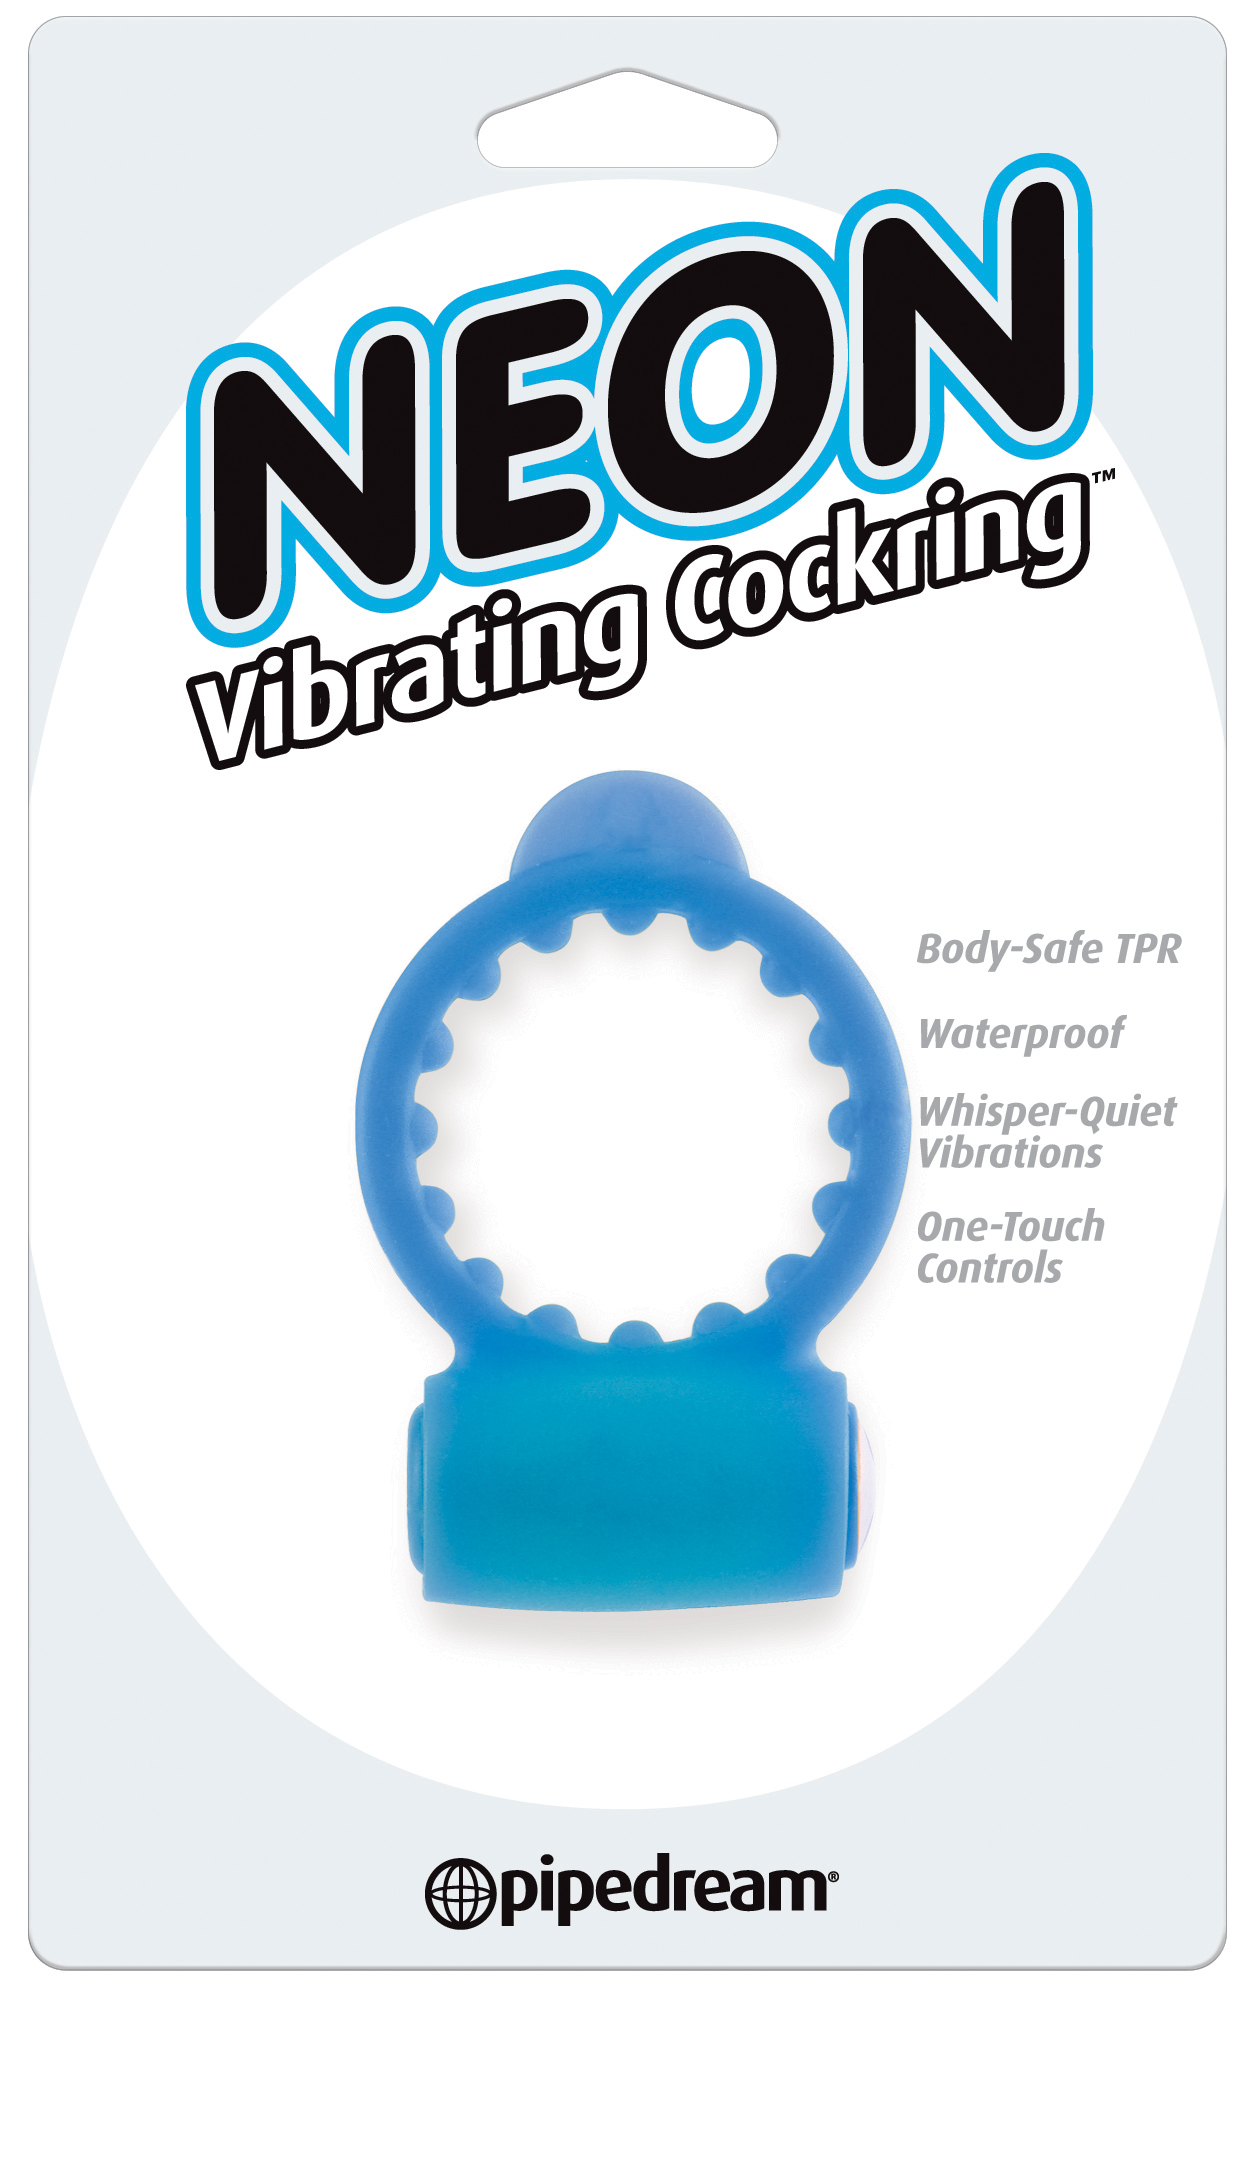 pd2366-11_neon_vibrating_cockring_PINK